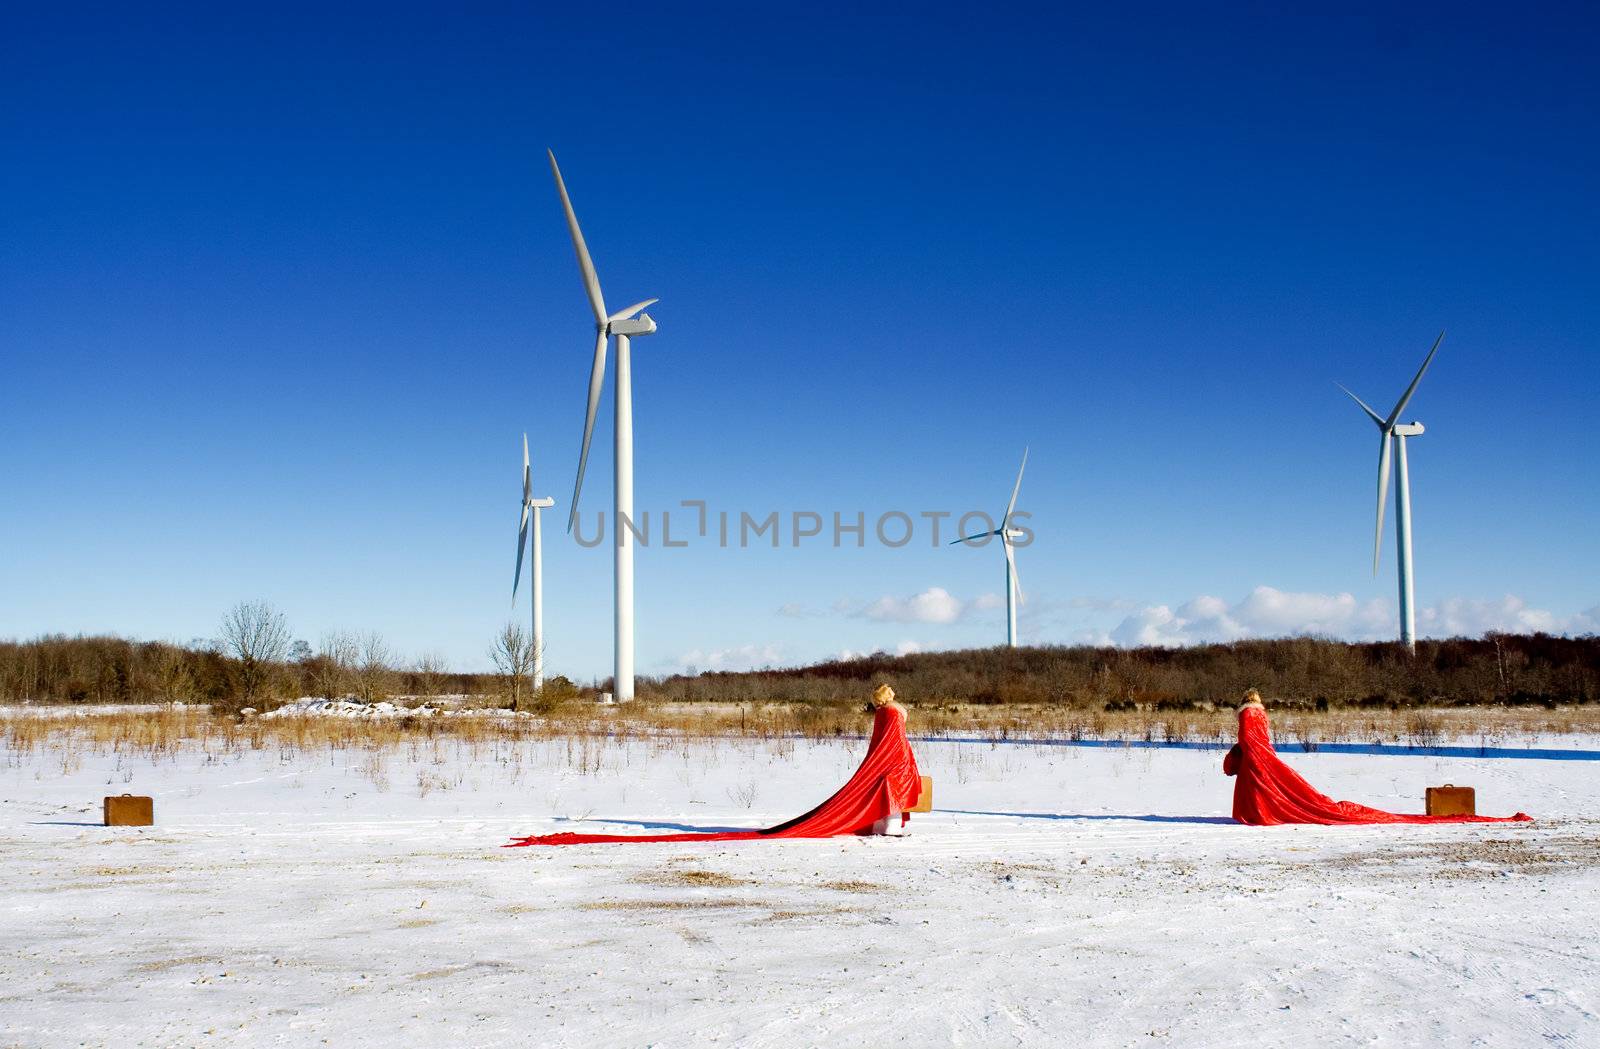 red ladies on snow field with windmills